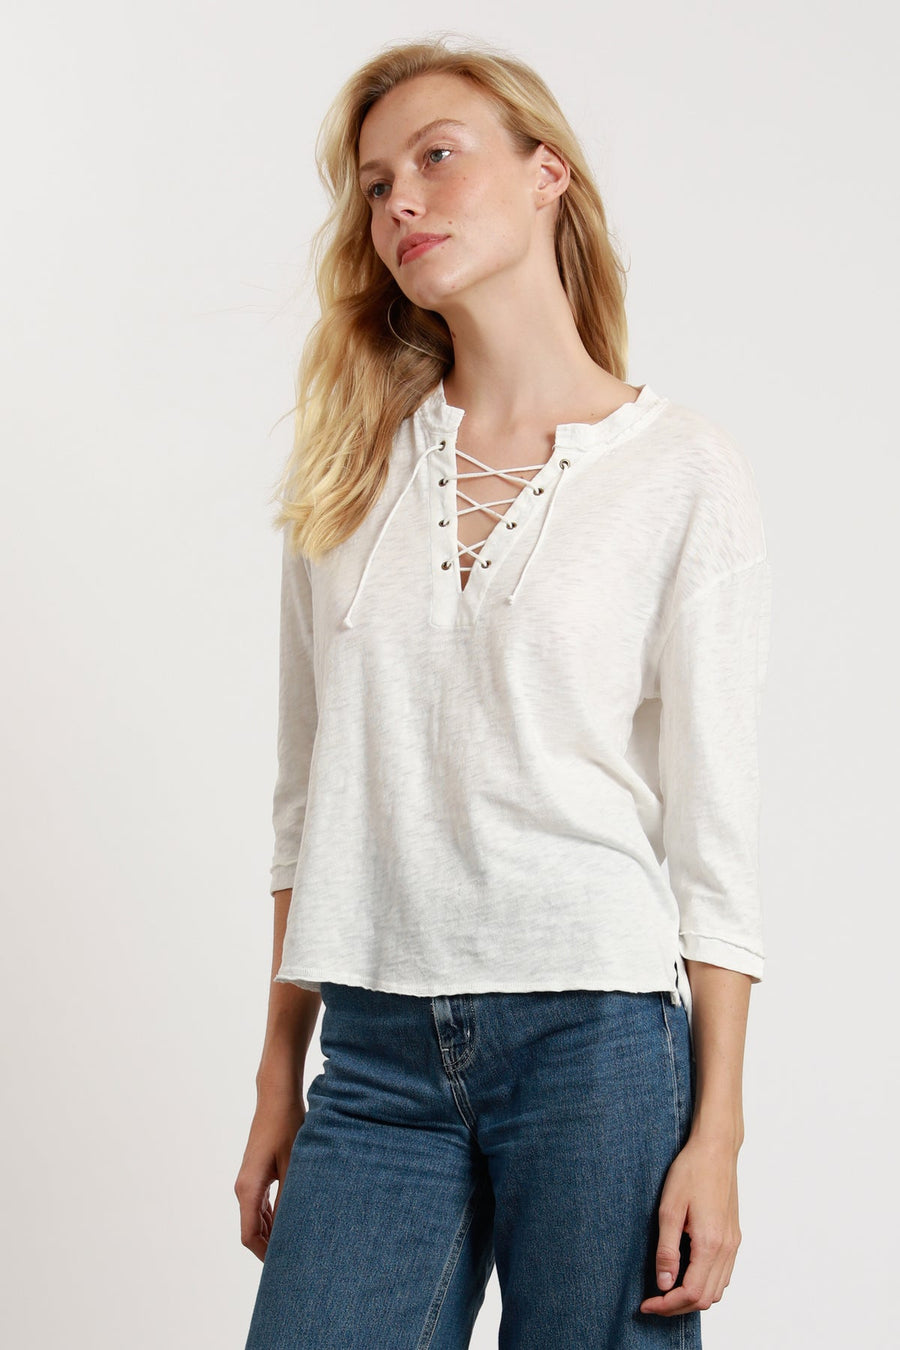 Lace 3/4 Sleeve Top